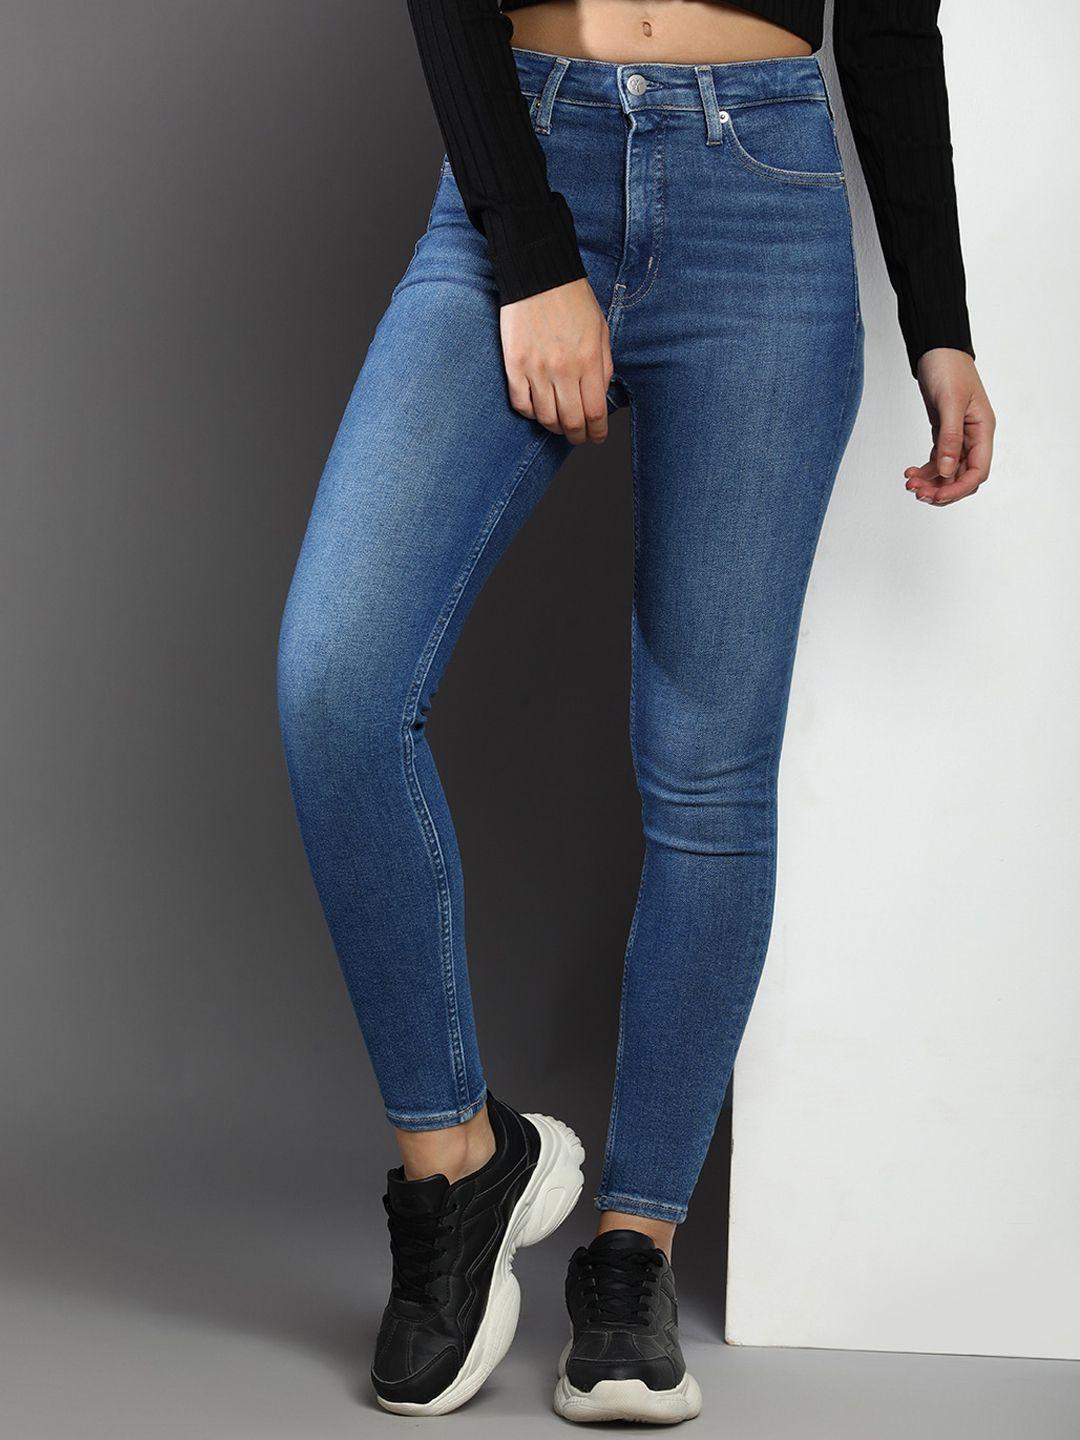 calvin-klein-jeans-women-skinny-fit-high-rise-light-fade-jeans